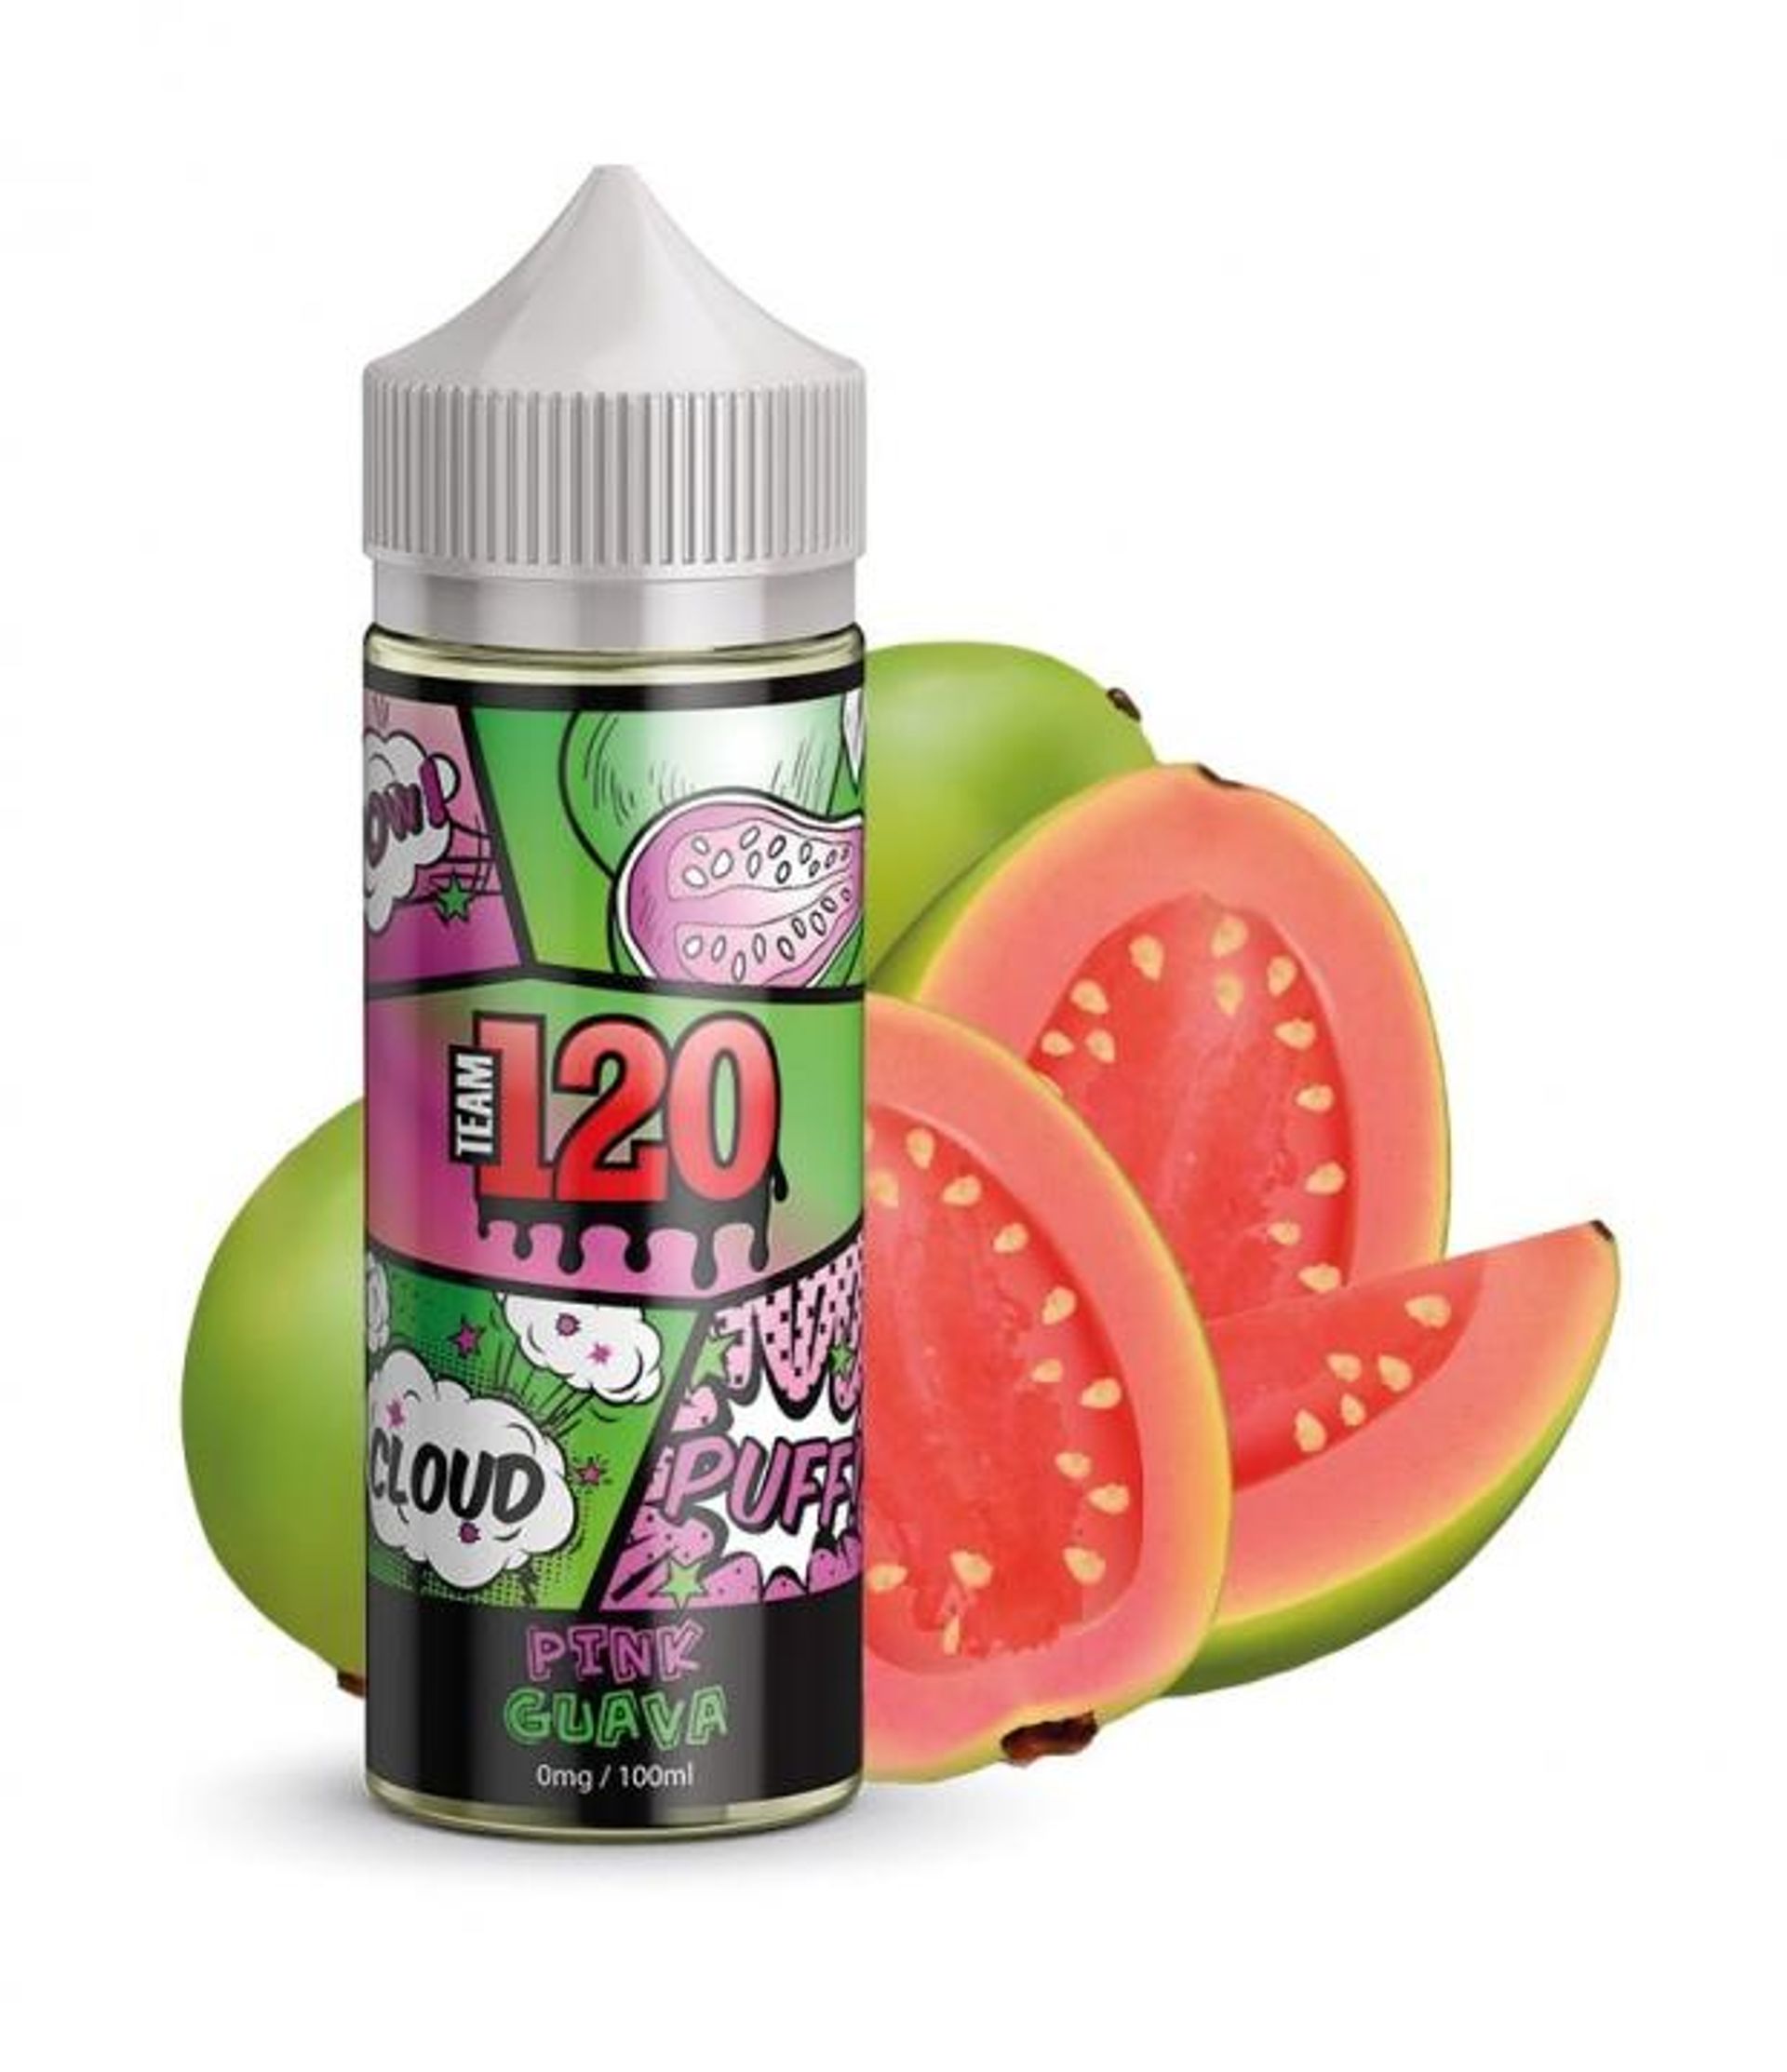 Image of Pink Guava by Team120